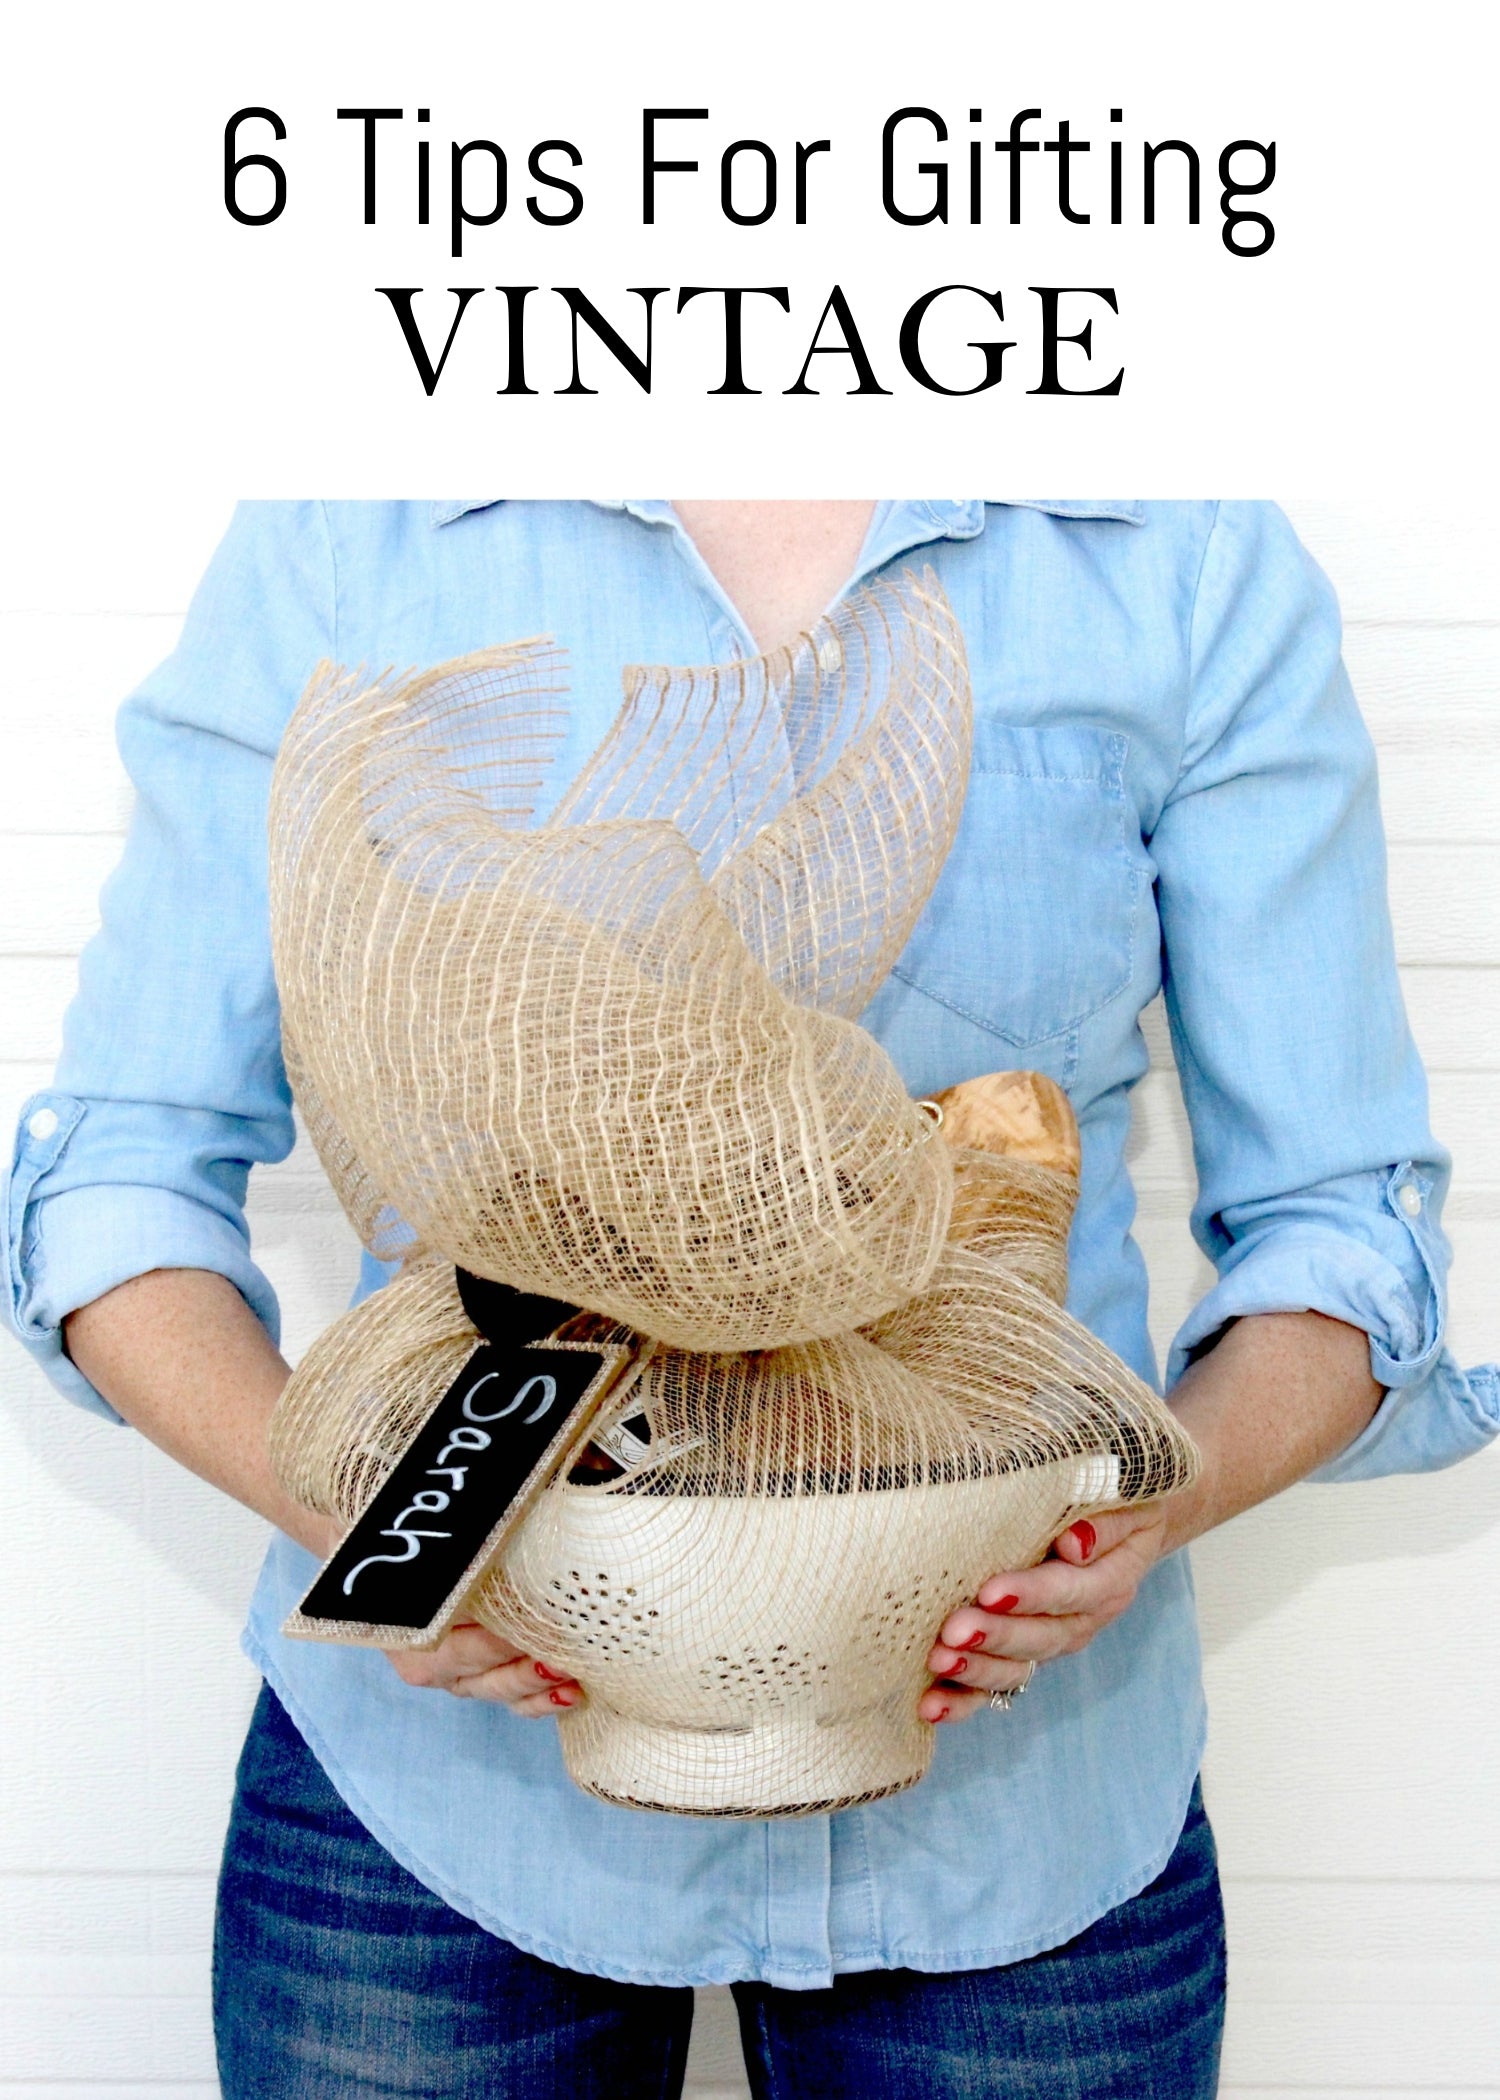 6 Tips For Gifting Vintage